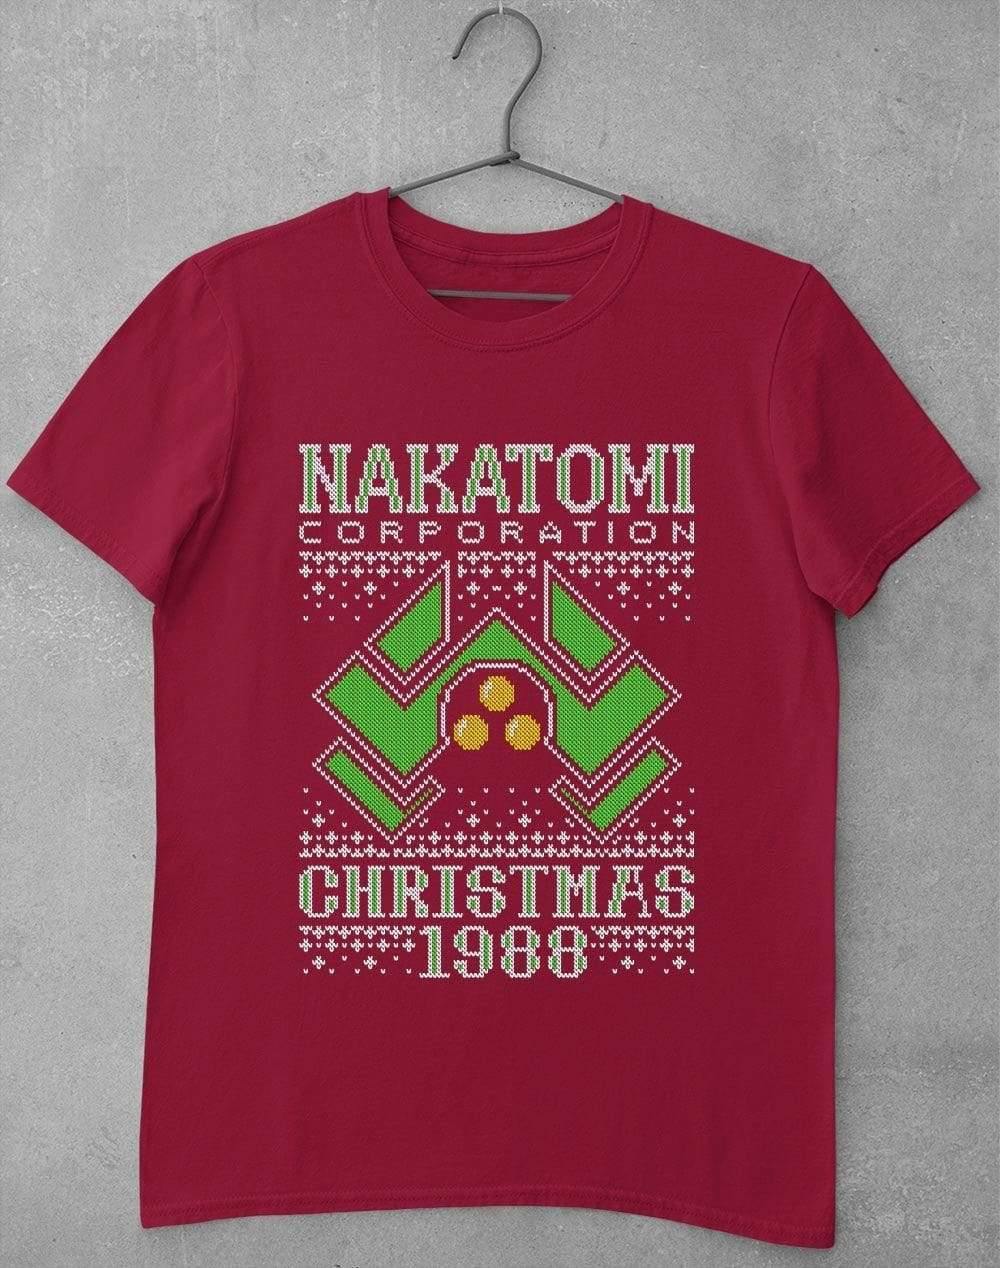 Nakatomi Christmas 1988 Knitted-Look T-Shirt S / Cardinal Red  - Off World Tees